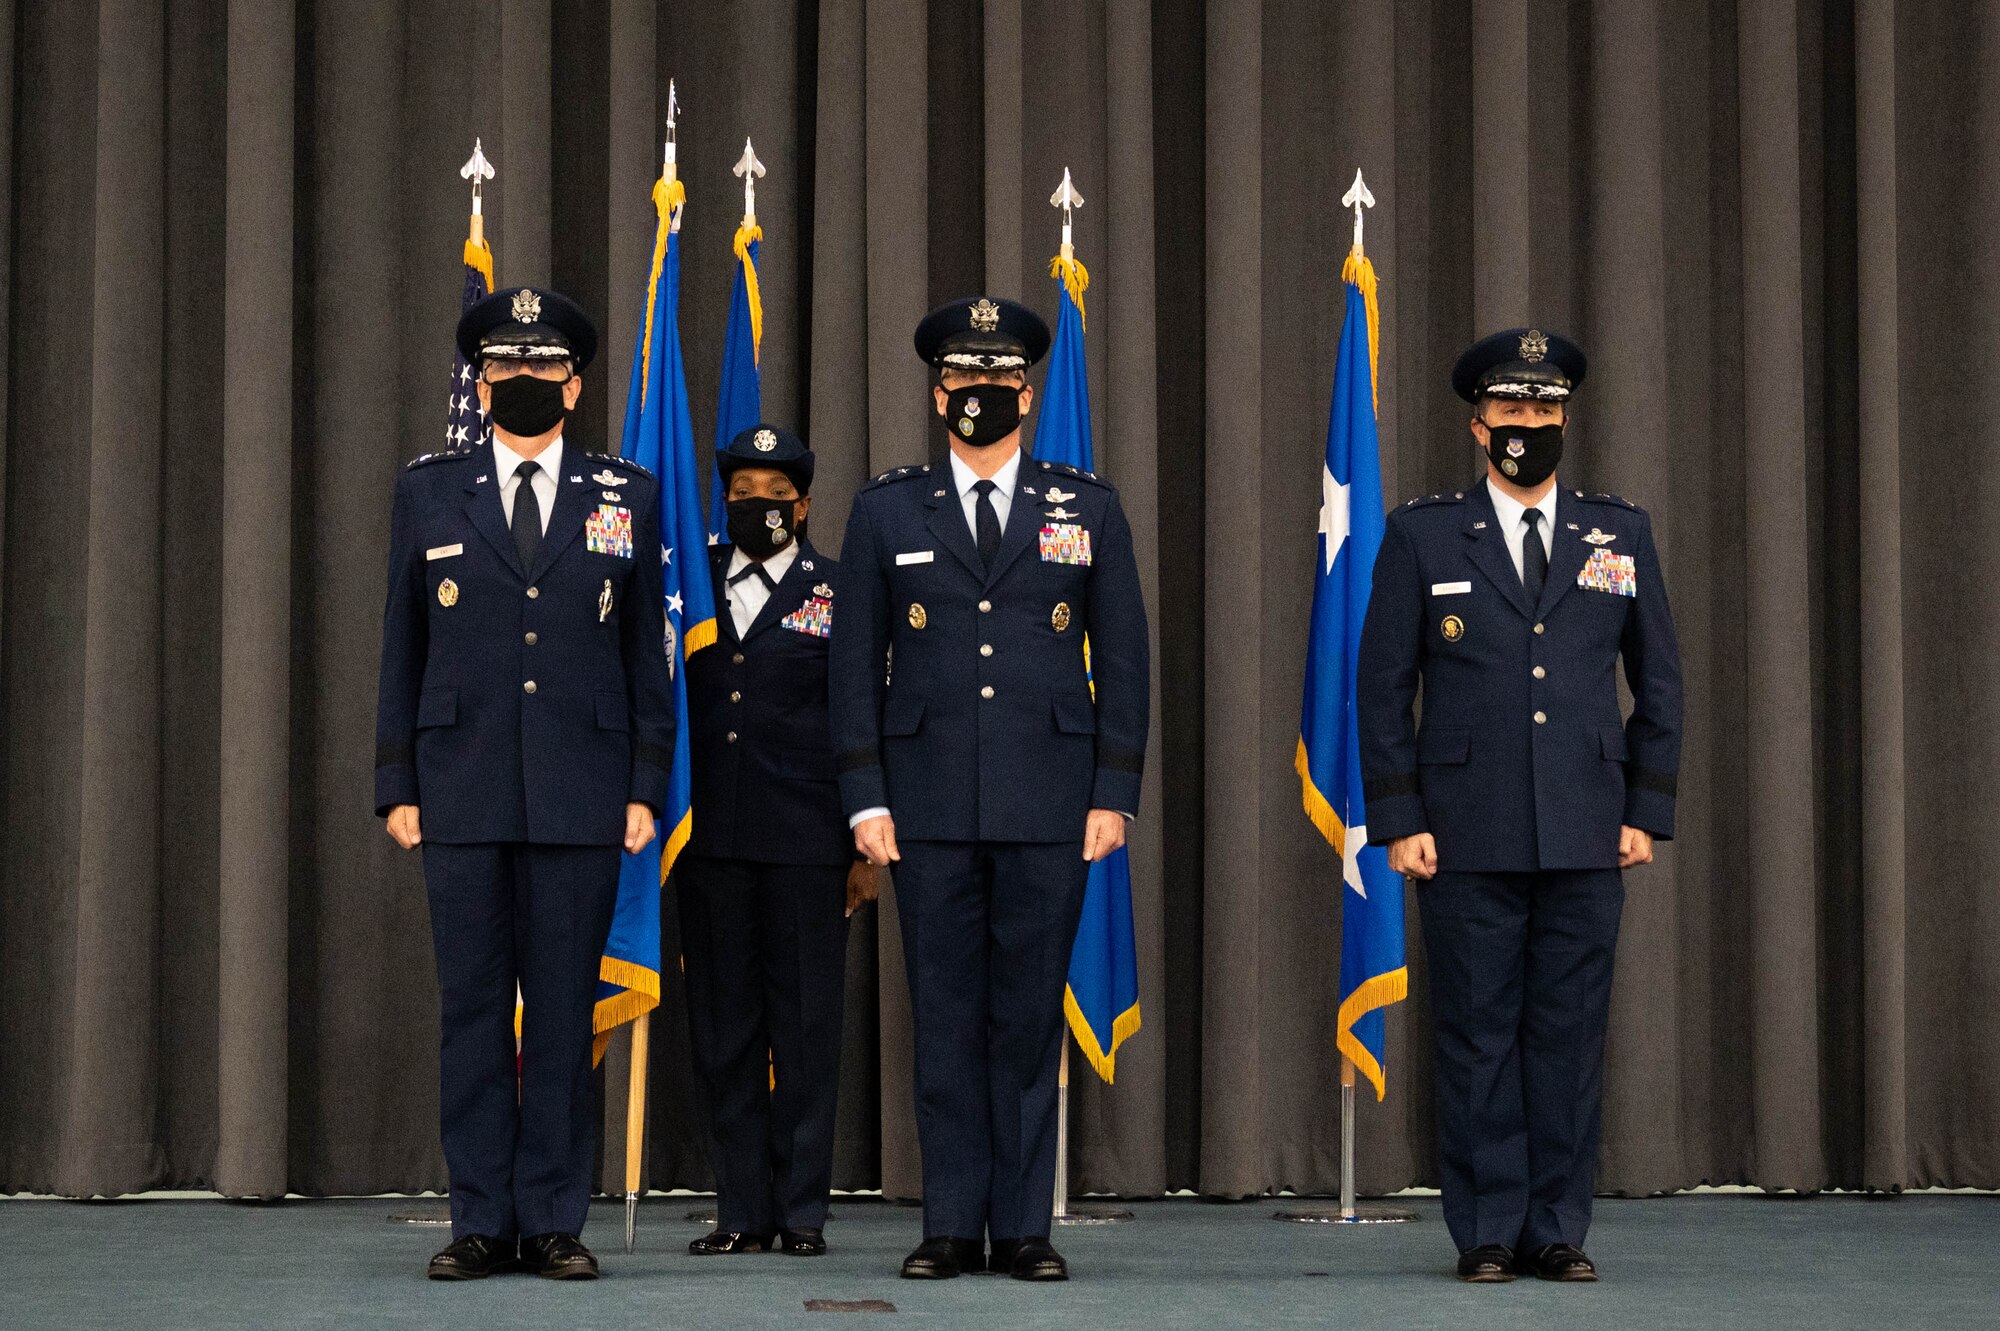 Gen. Tim Ray, left, commander of Air Force Global Strike Command, Lt. Gen. (select) Mark Weatherington, center, outgoing 8th Air Force and Joint-Global Strike Operations Center commander, and Maj. Gen. Andrew Gebara, incoming 8th Air Force and J-GSOC commander, stand at attention during  a change of command ceremony at Barksdale Air Force Base, La., August 16, 2021. A change of command is a military tradition that represents a formal transfer of authority and responsibility for a unit from one commanding or flag officer to another. (U.S. Air Force photo by Senior Airman Jovante Johnson)